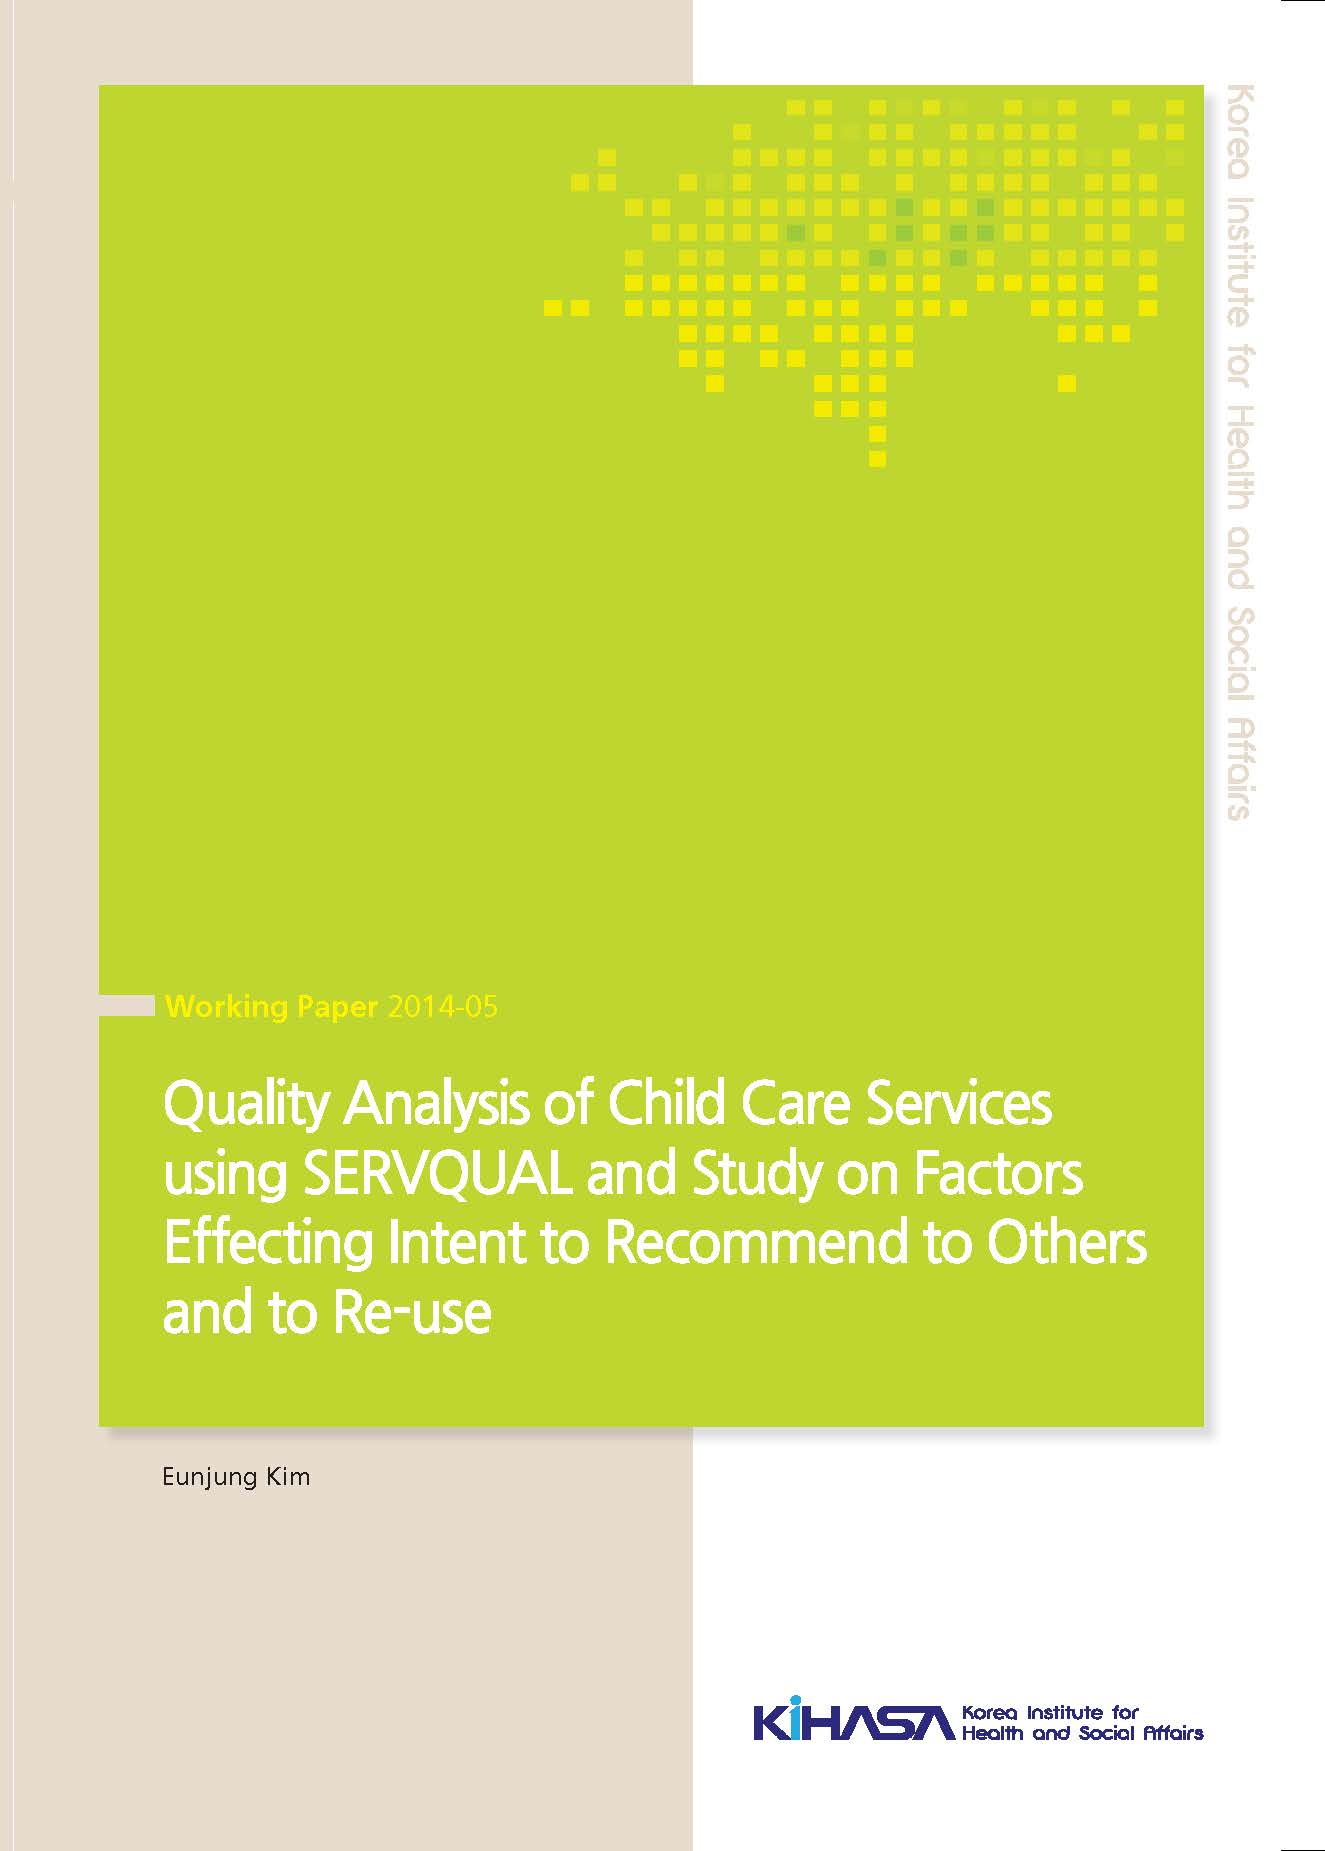 Quality Analysis of Child Care Services using SERVQUAL and Study on Factors Effecting Intent to Recommend to Others and to Re-use